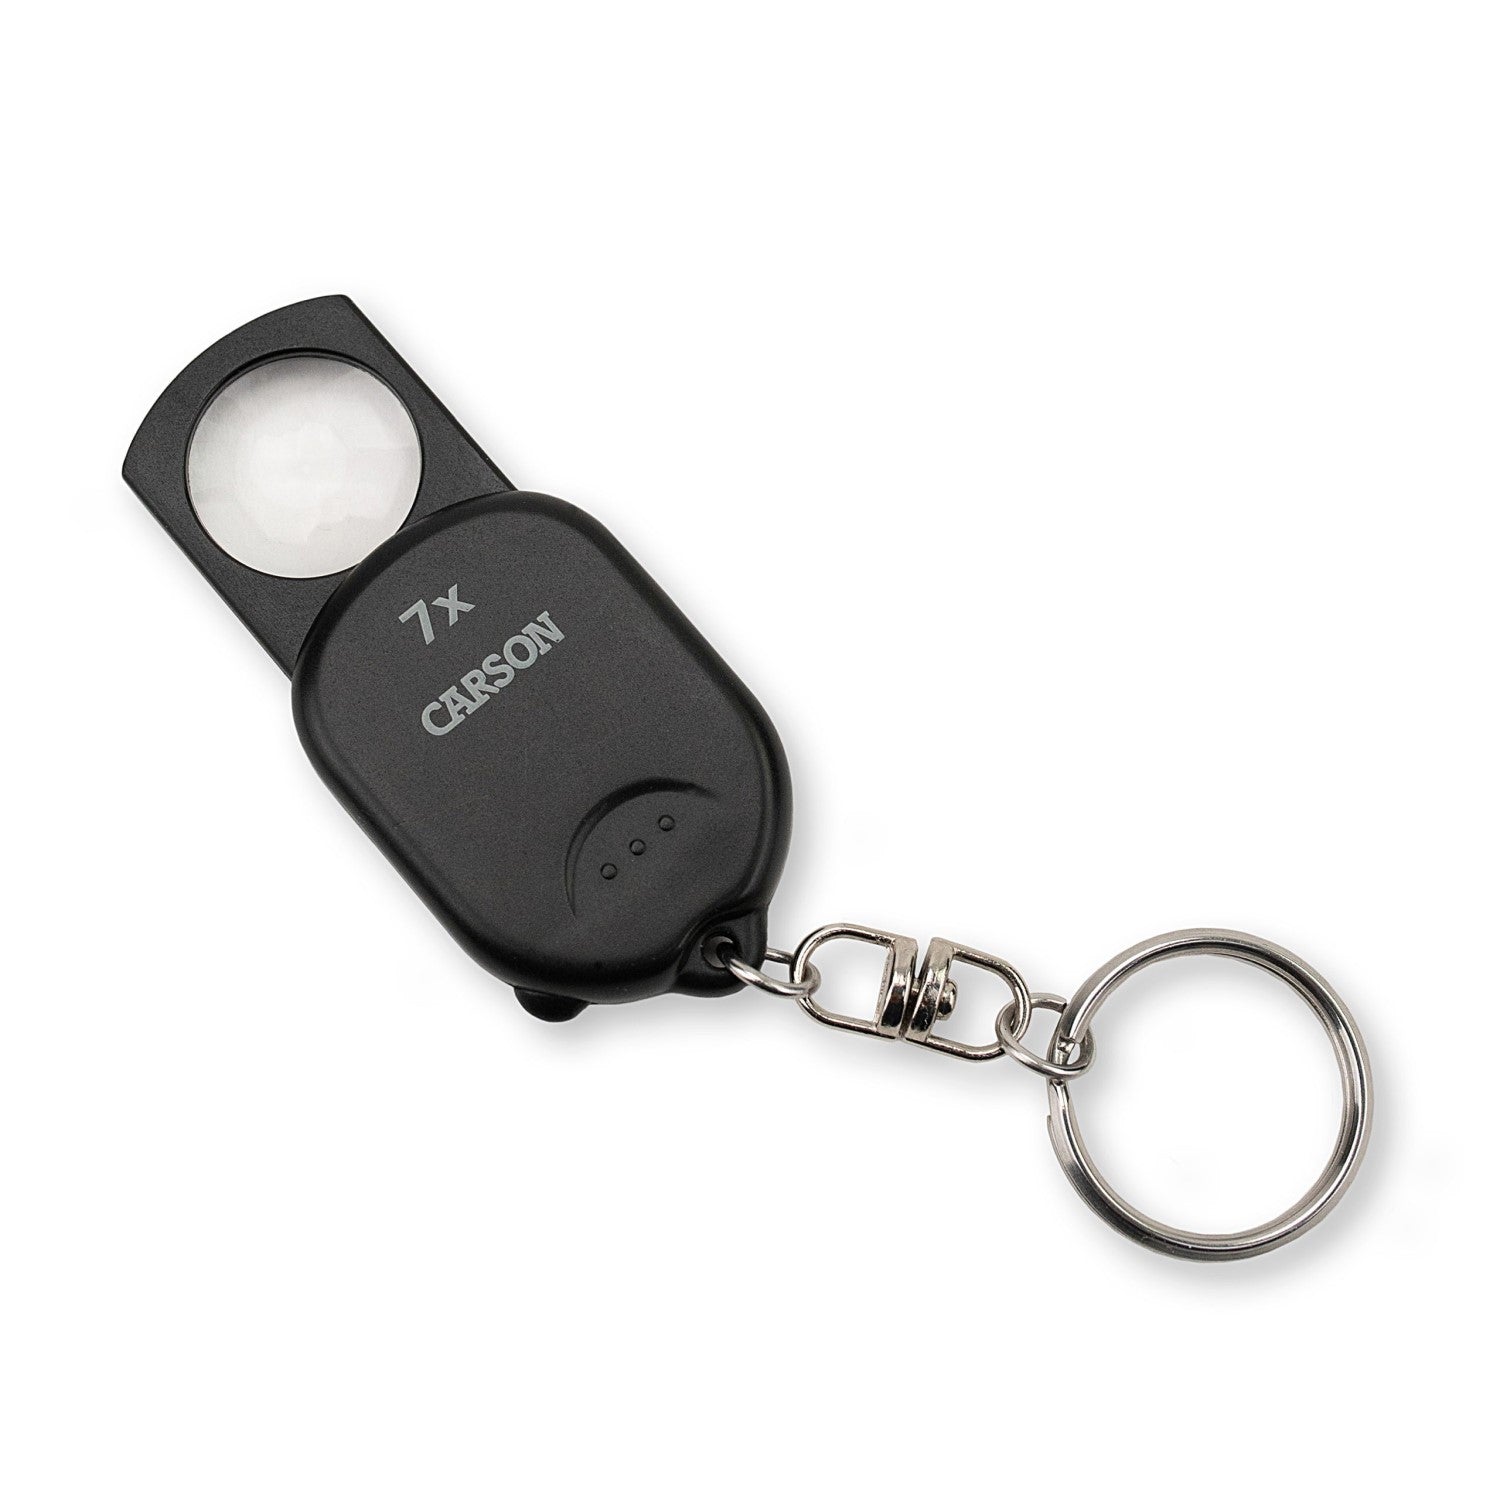 Image of the keychain when using the pop-up magnifier.